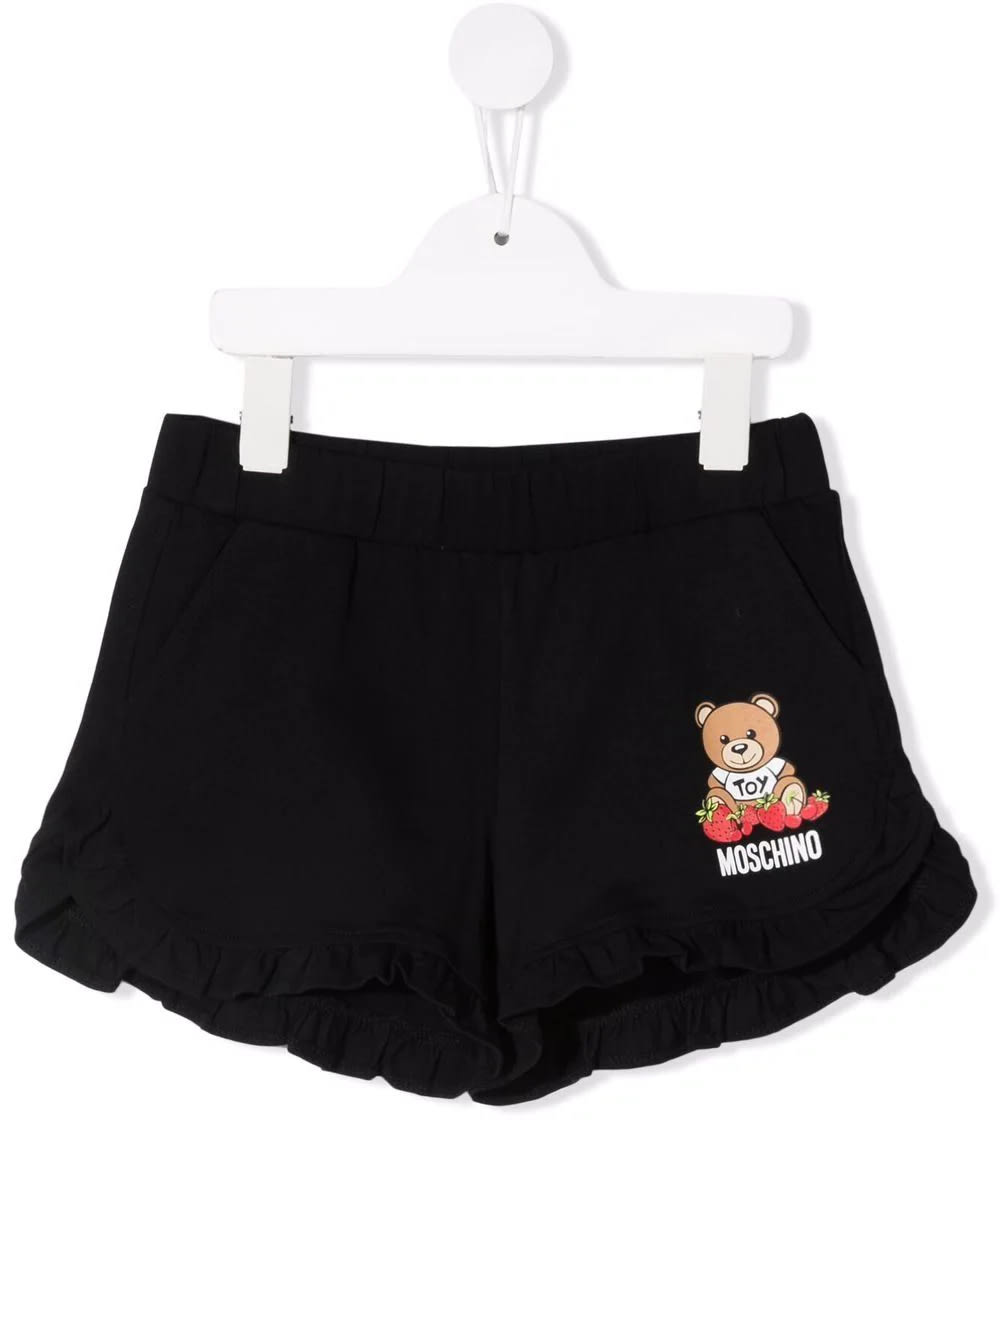 Moschino Kids Black Shorts With Ruffles On The Bottom And Teddy Bear With Strawberries